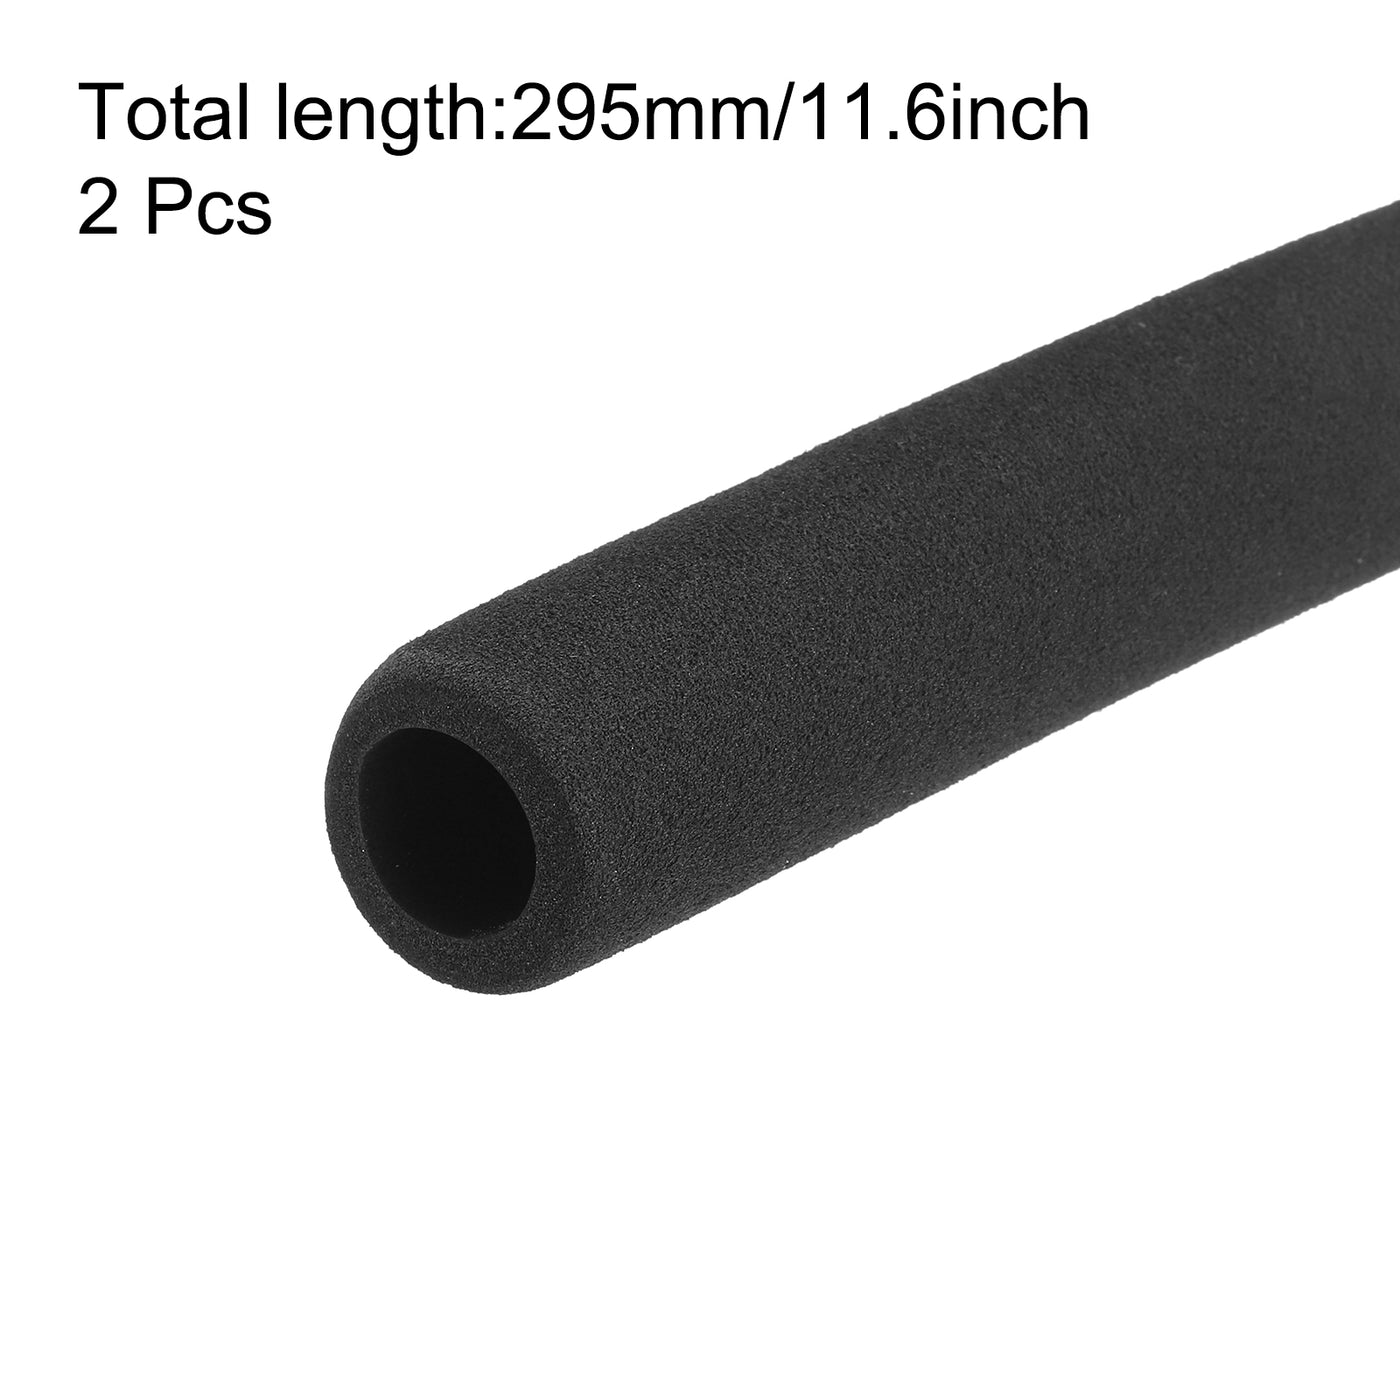 uxcell Uxcell Pipe Insulation Tube Foam Tubing for Handle Grip Support 18mm ID 30mm OD 295mm Heat Preservation Black 2pcs